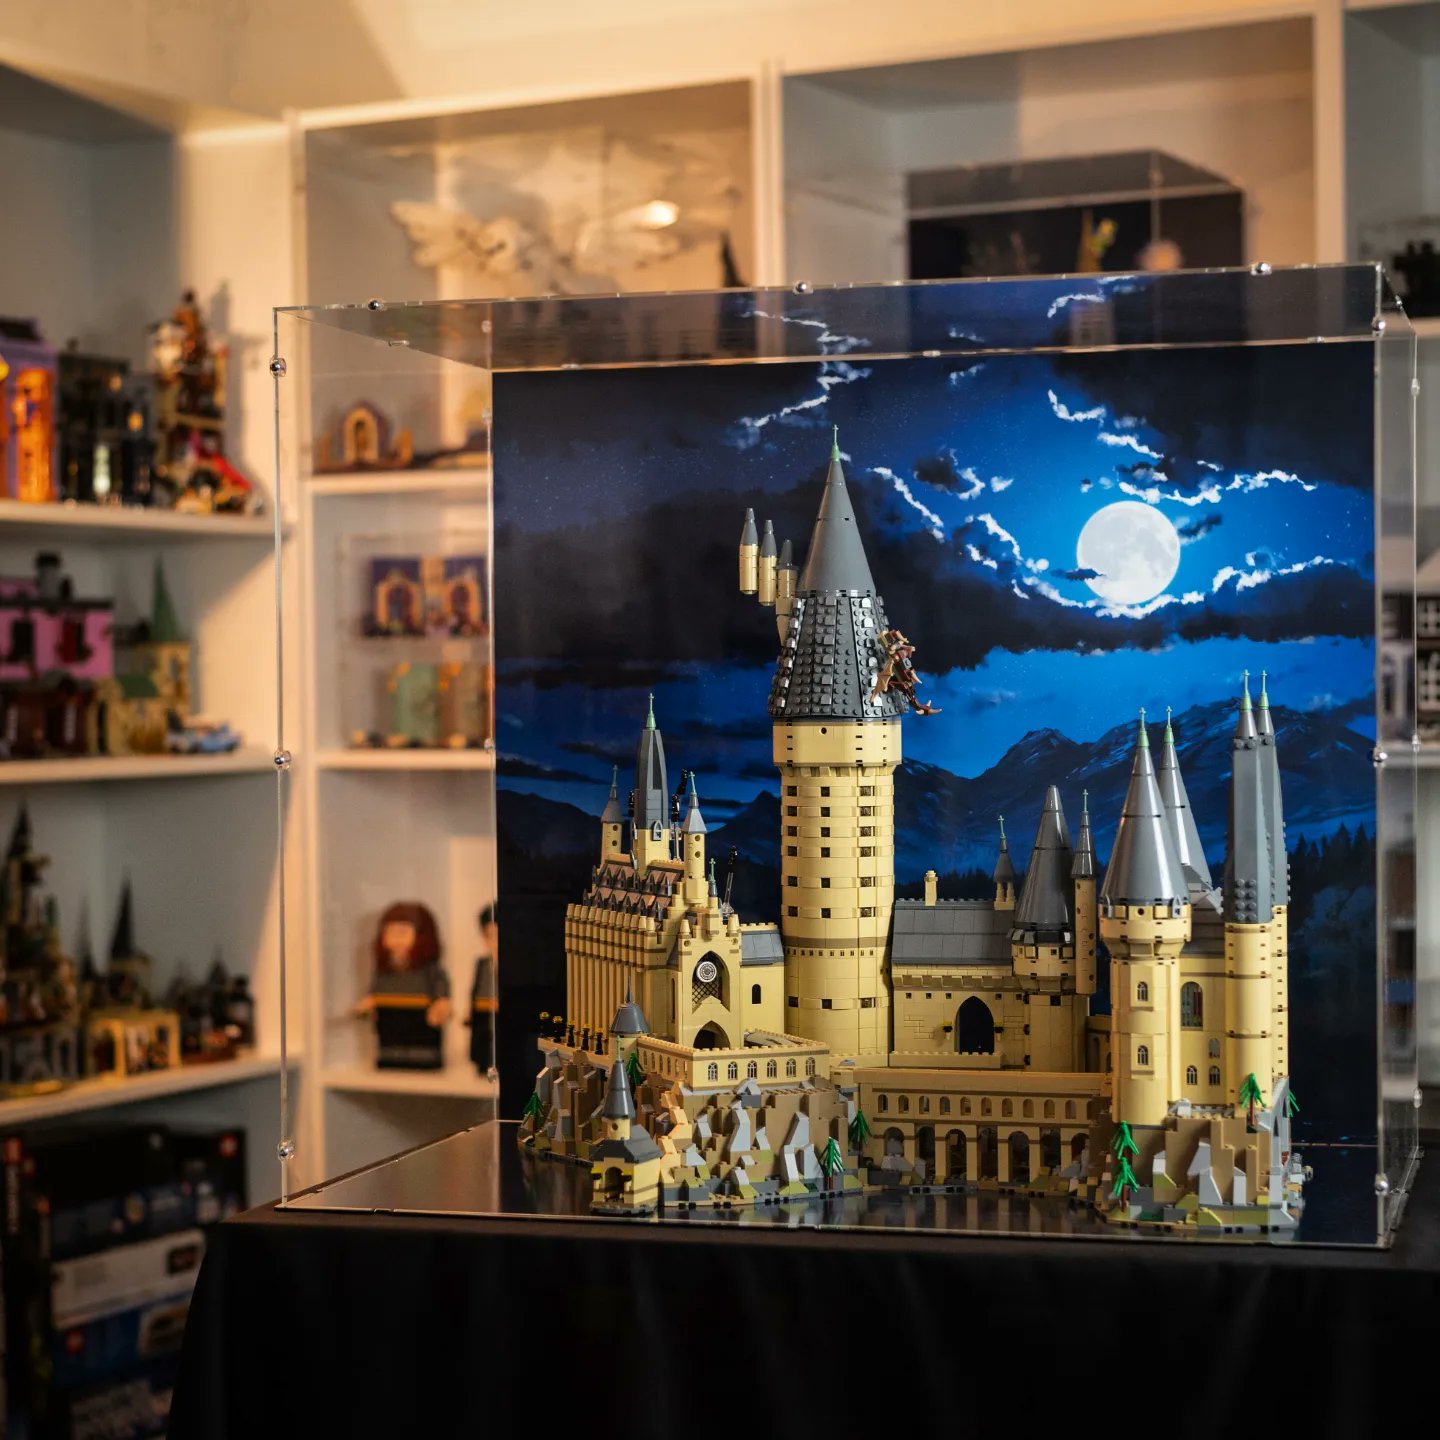 handle sværge skildring iDisplayit on Twitter: "Our LEGO Hogwarts Castle @idisplayit case has had a  makeover. 🎉 Now available with a night sky background and water effect  floor. Link to all our LEGO displays can